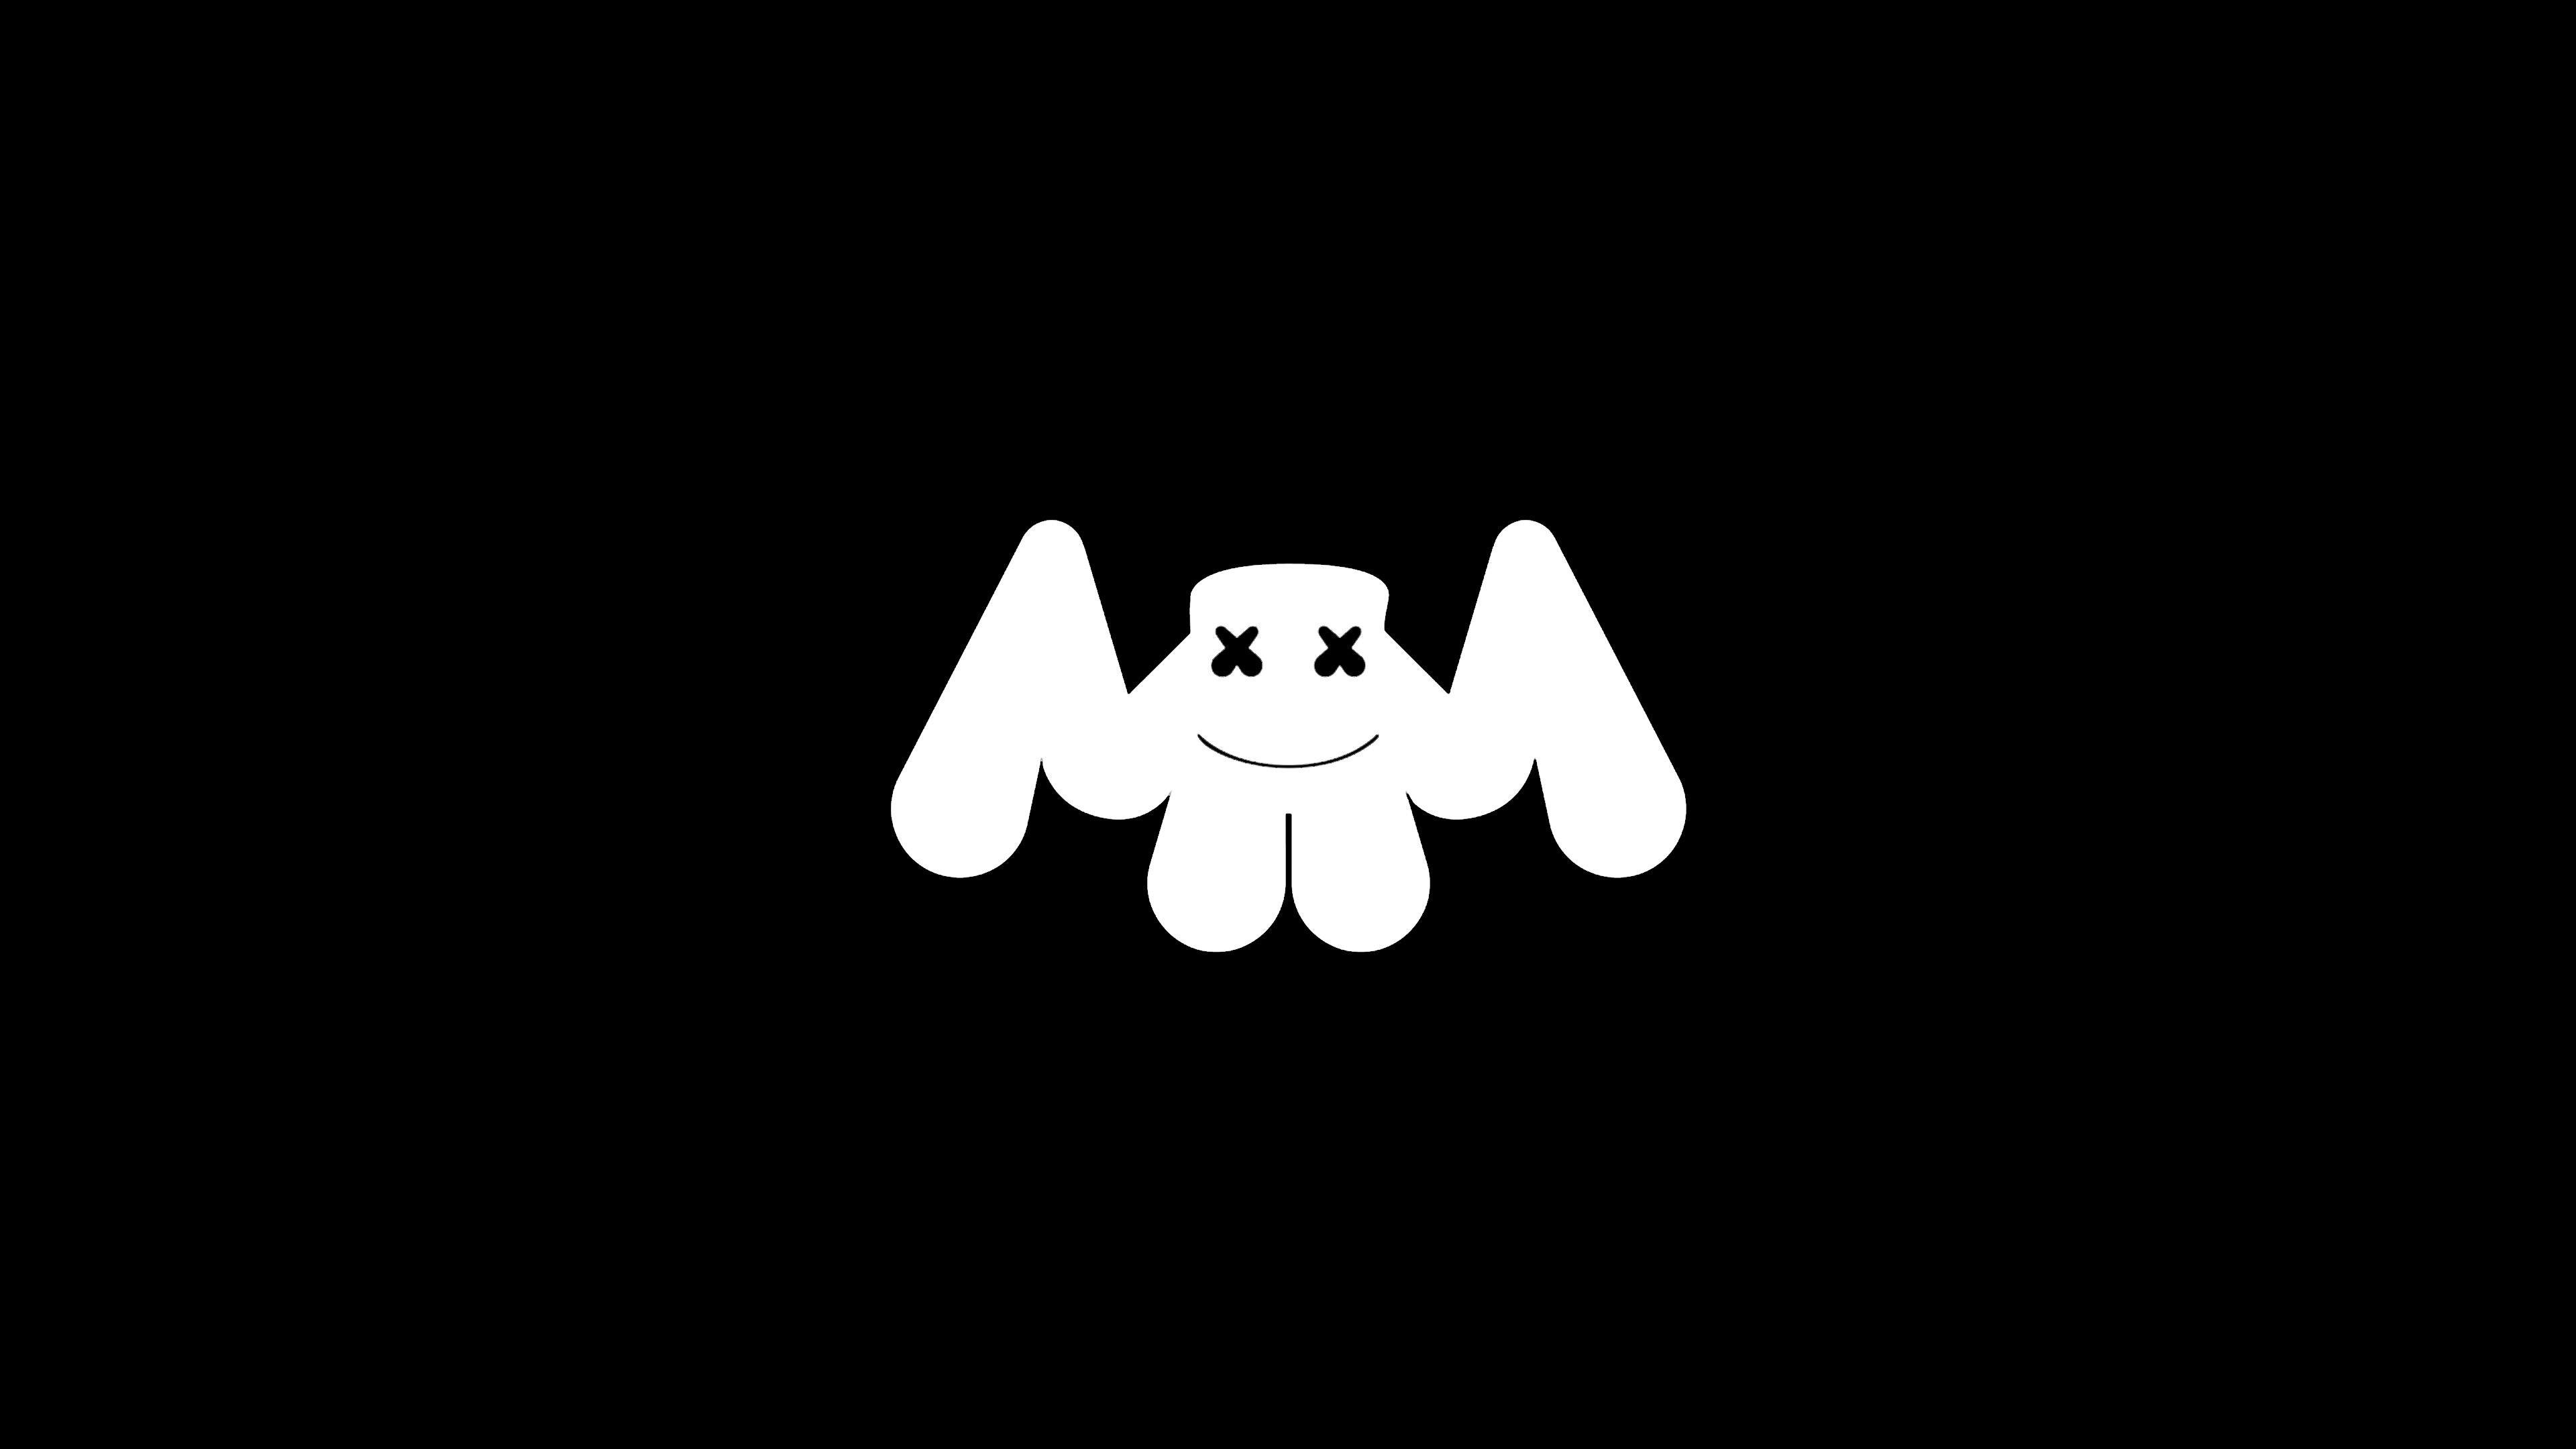 Marshmello logo dark hd music k wallpapers images backgrounds photos and pictures